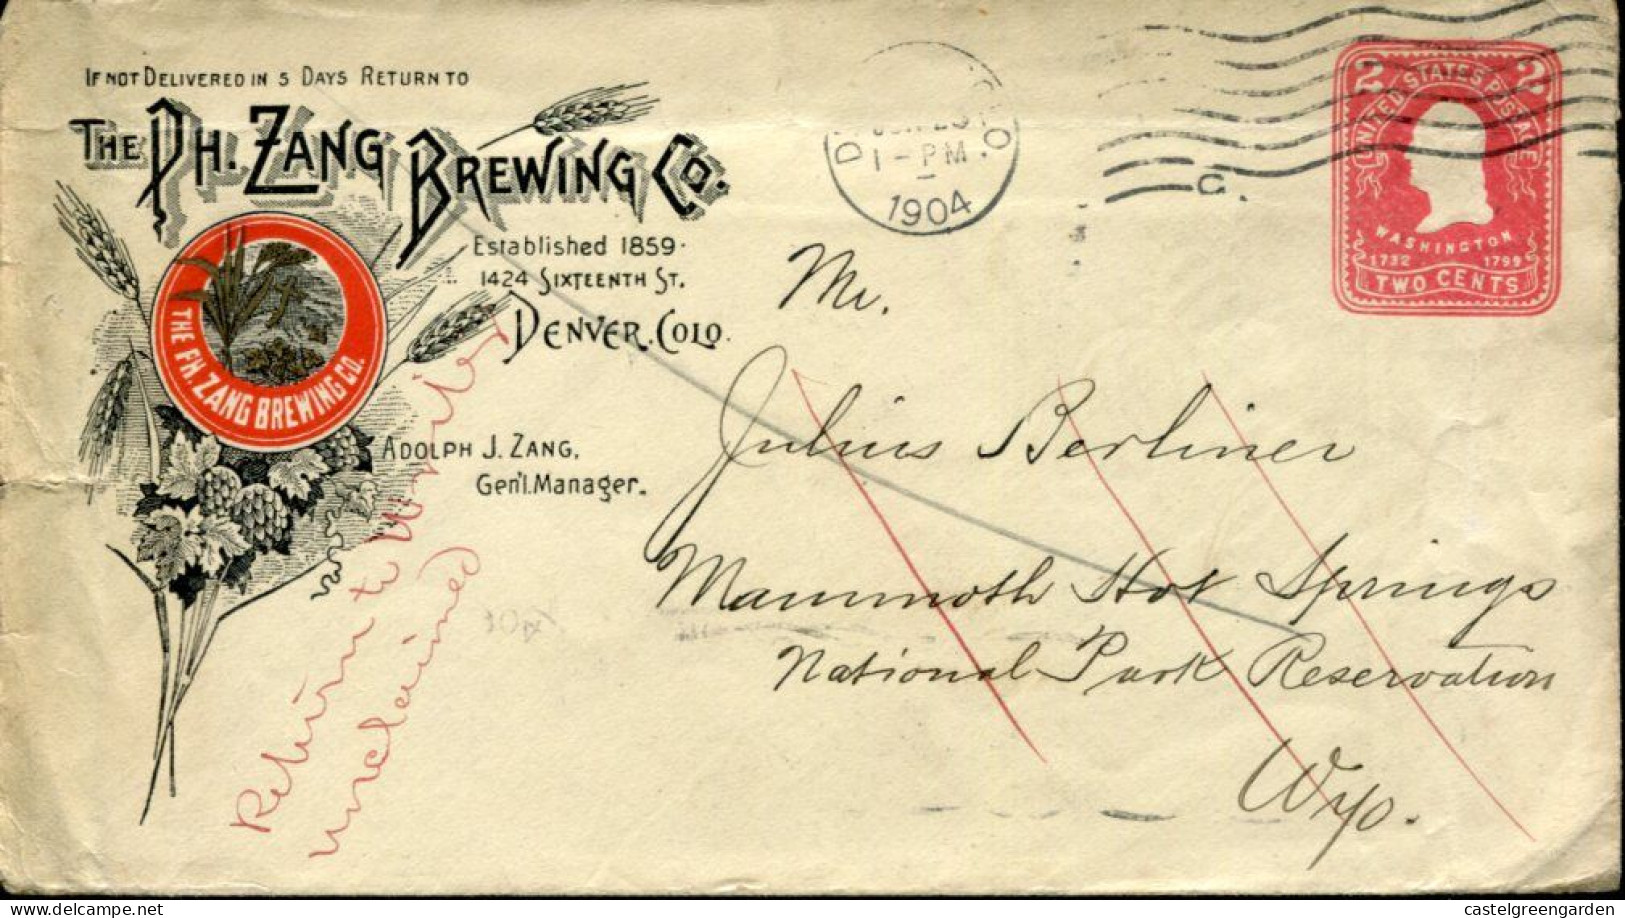 X0322 U.s.a. Stationery Cover Circuled 1904 From Denver To Yellowstone,The Ph.Zang Brewing Co. Denver - Beers